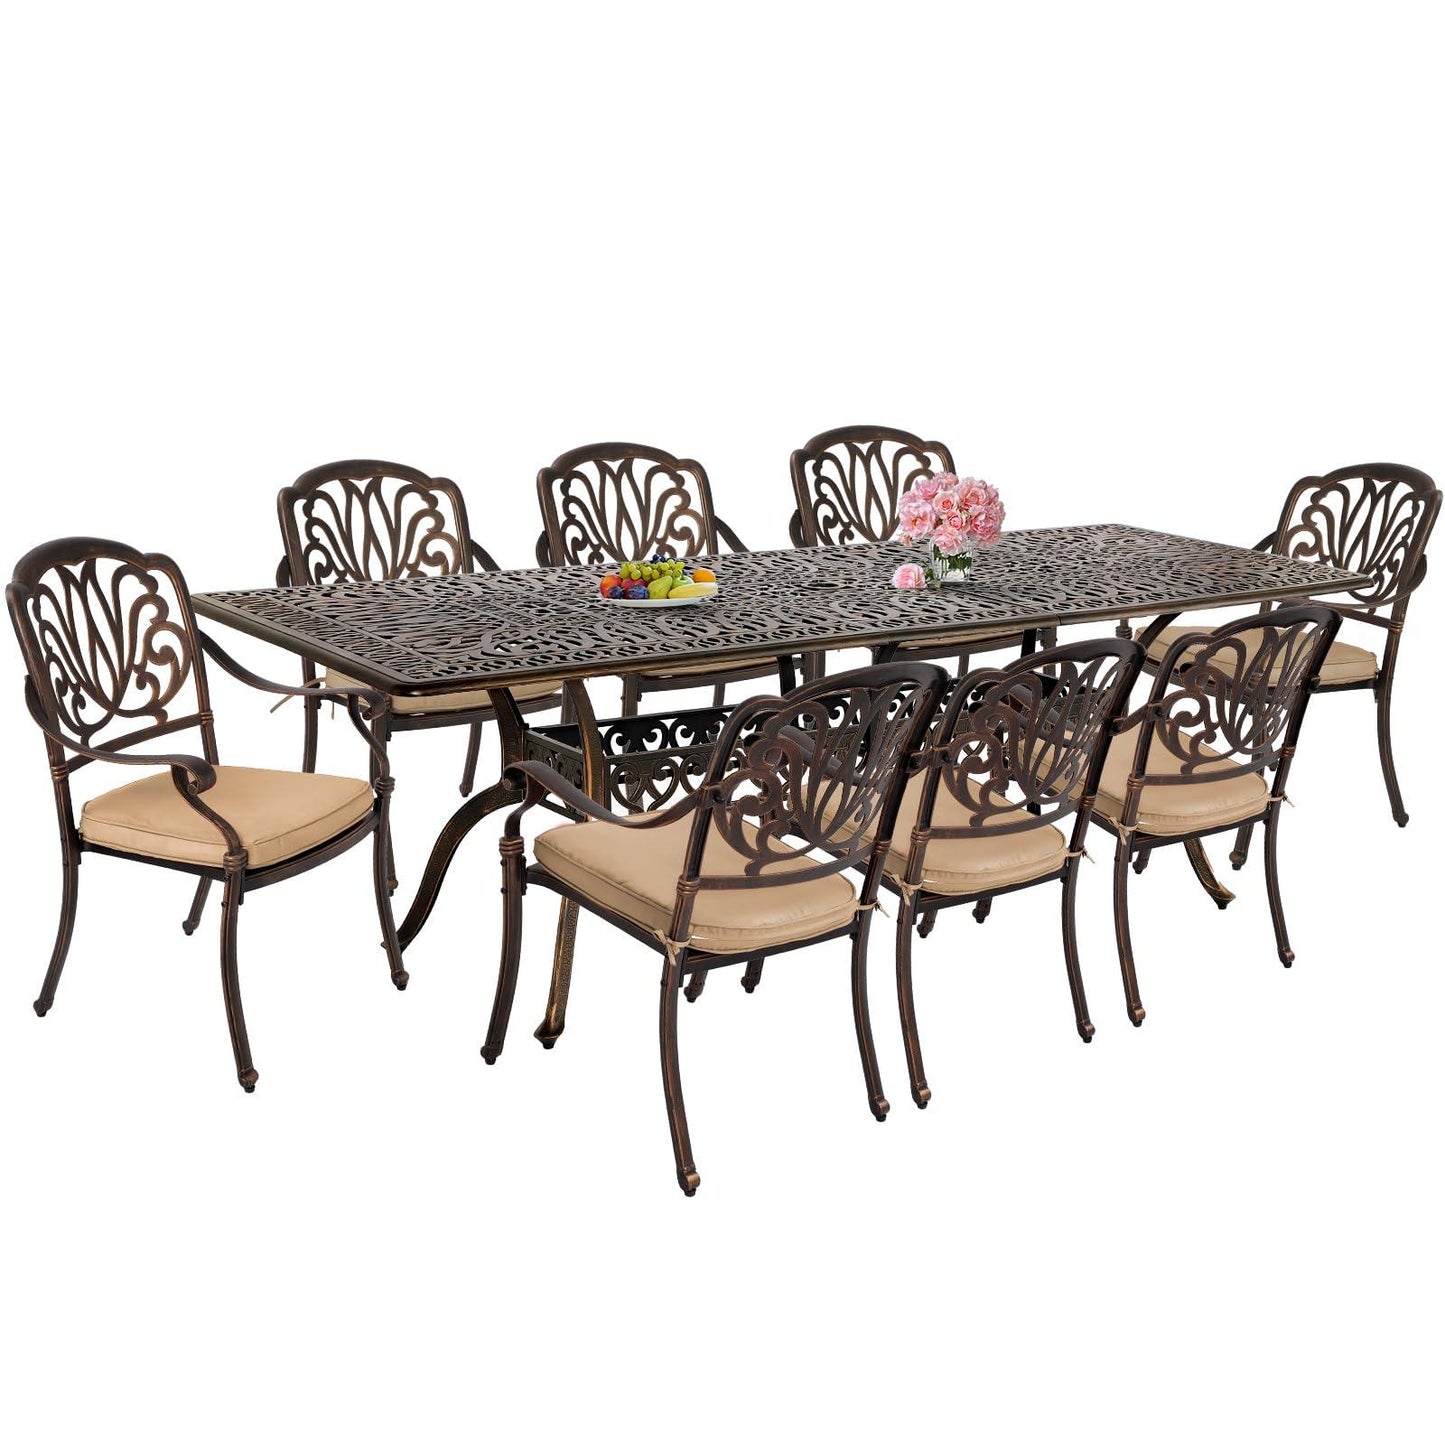 TITIMO 9-Piece Cast Aluminum Patio Furniture Set, Outdoor Dining Set Bistro Conversation Set, All-Weather Patio Dning Chairs and Rectangular Dining Set with Umbrella Hole(8 Khaki Flower Chairs) - CookCave